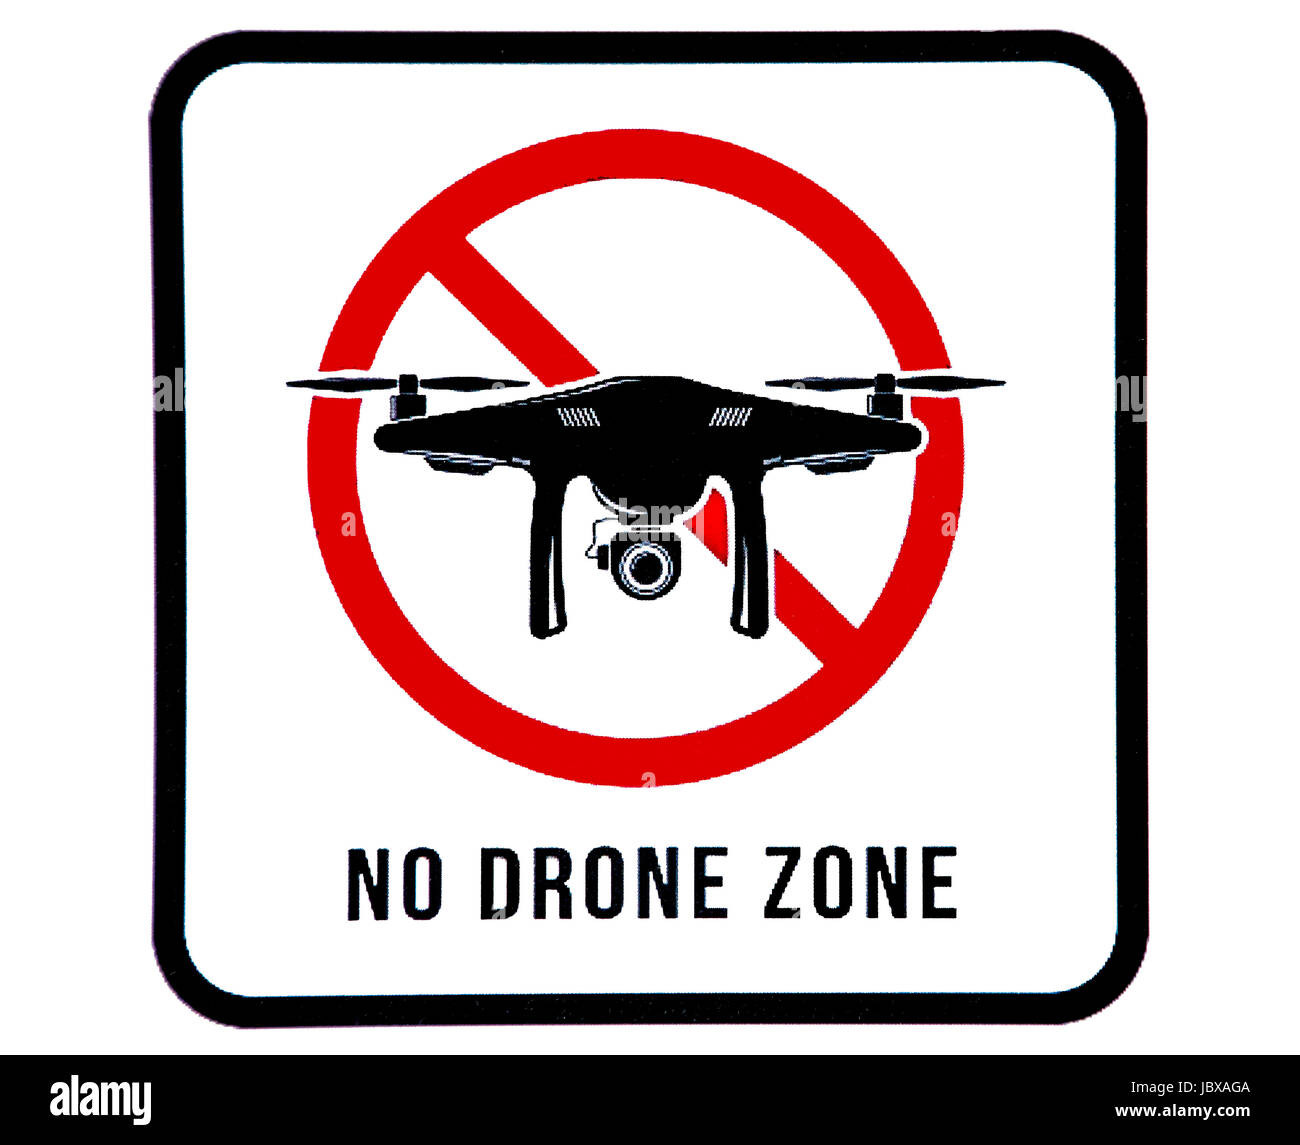 No drone zone sign prohibiting drones from flying over restricted area Stock Photo